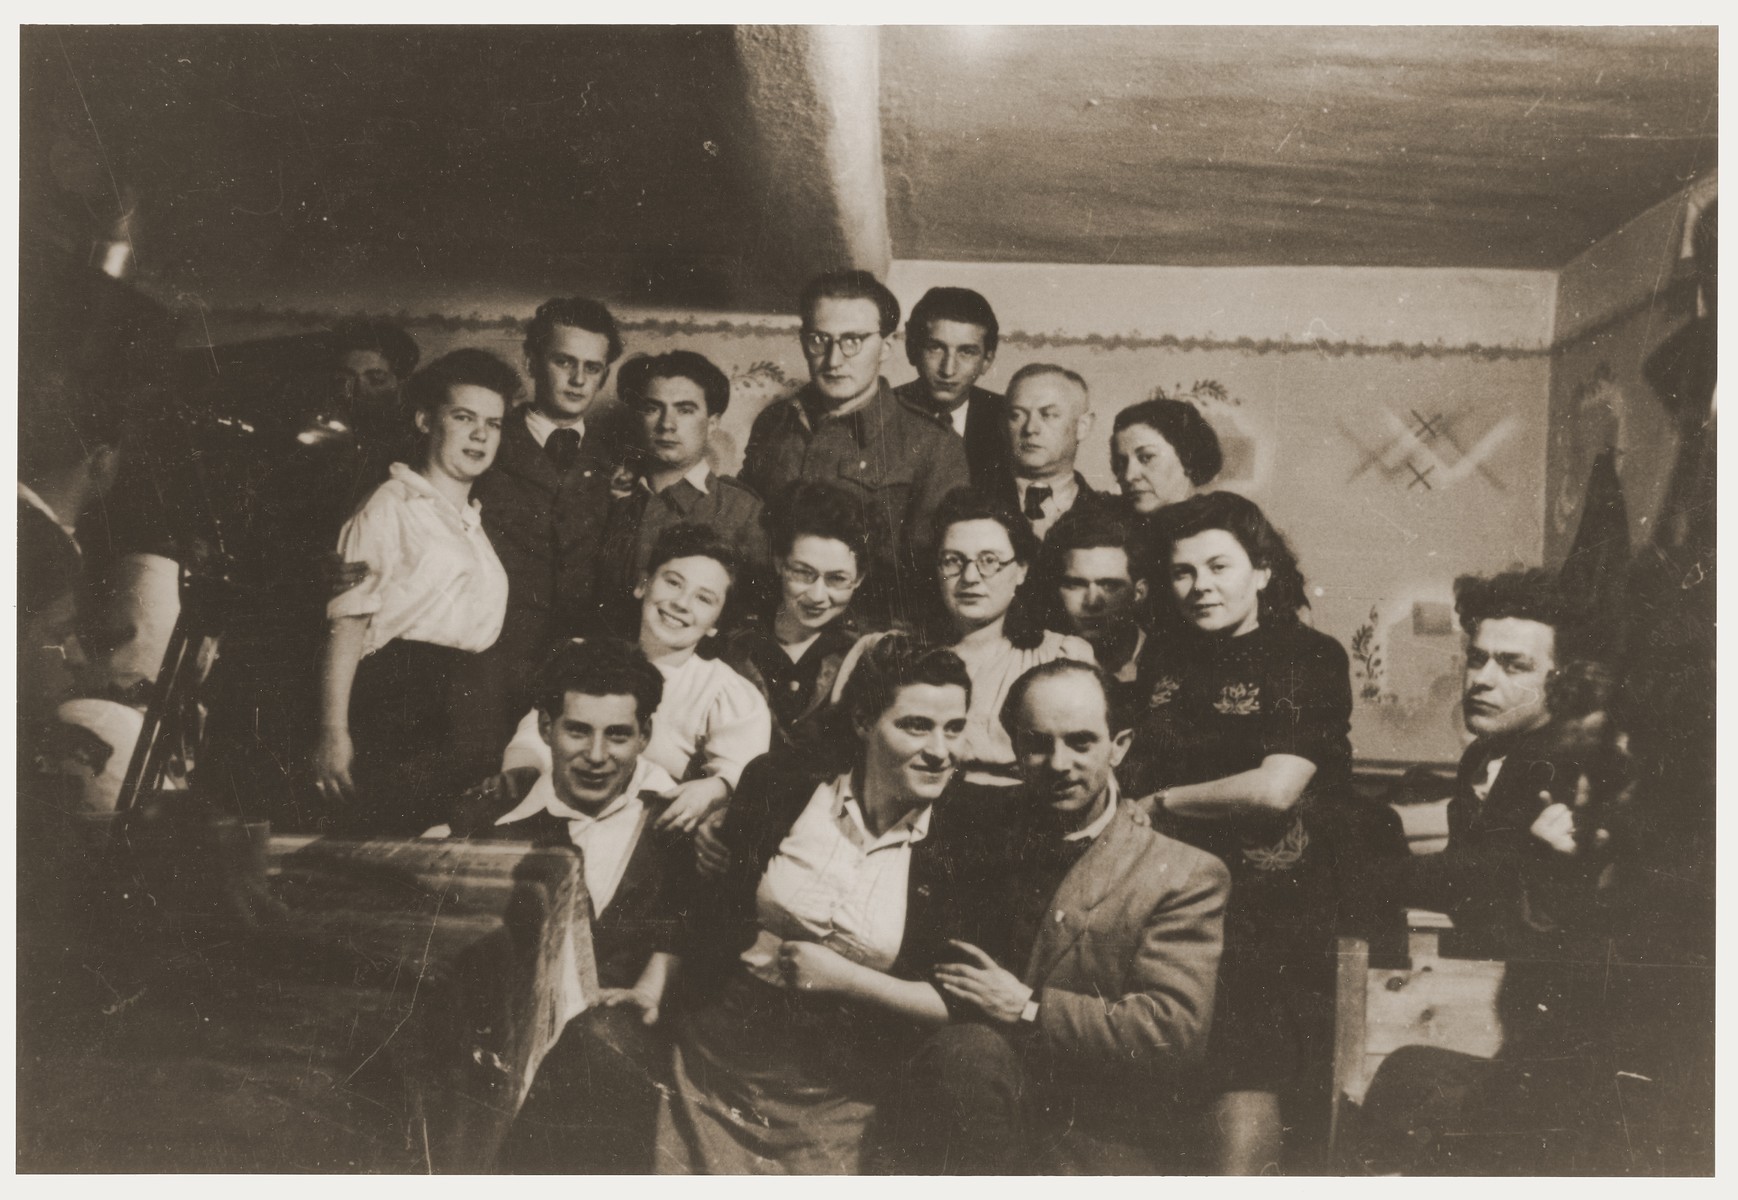 Group portrait of members of Kibbutz Nili hachshara (Zionist collective) in Pleikershof, Germany.  

Among those pictured are Noach and Sara (Feldberg) Miedzinski (front row, center) and Baruch Chita (front row, left).